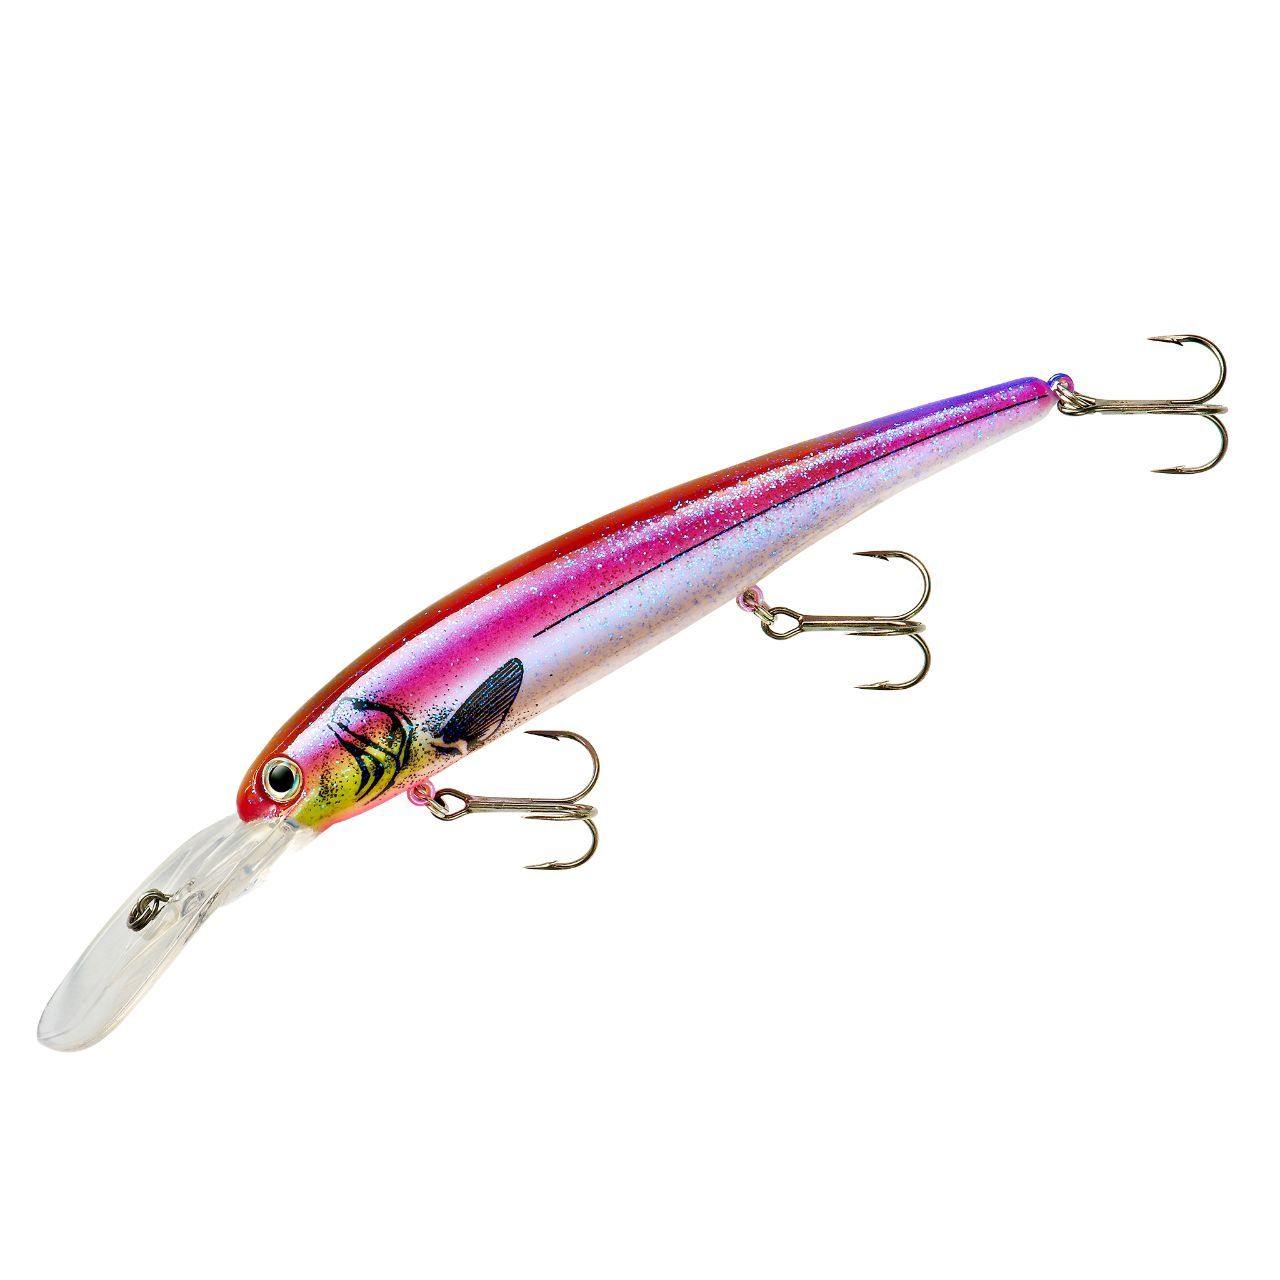 OLD LURE VINTAGE BANDIT DIVER LURE BRIGHTLY COLORED PATTERN FOR BASS  FISHING.